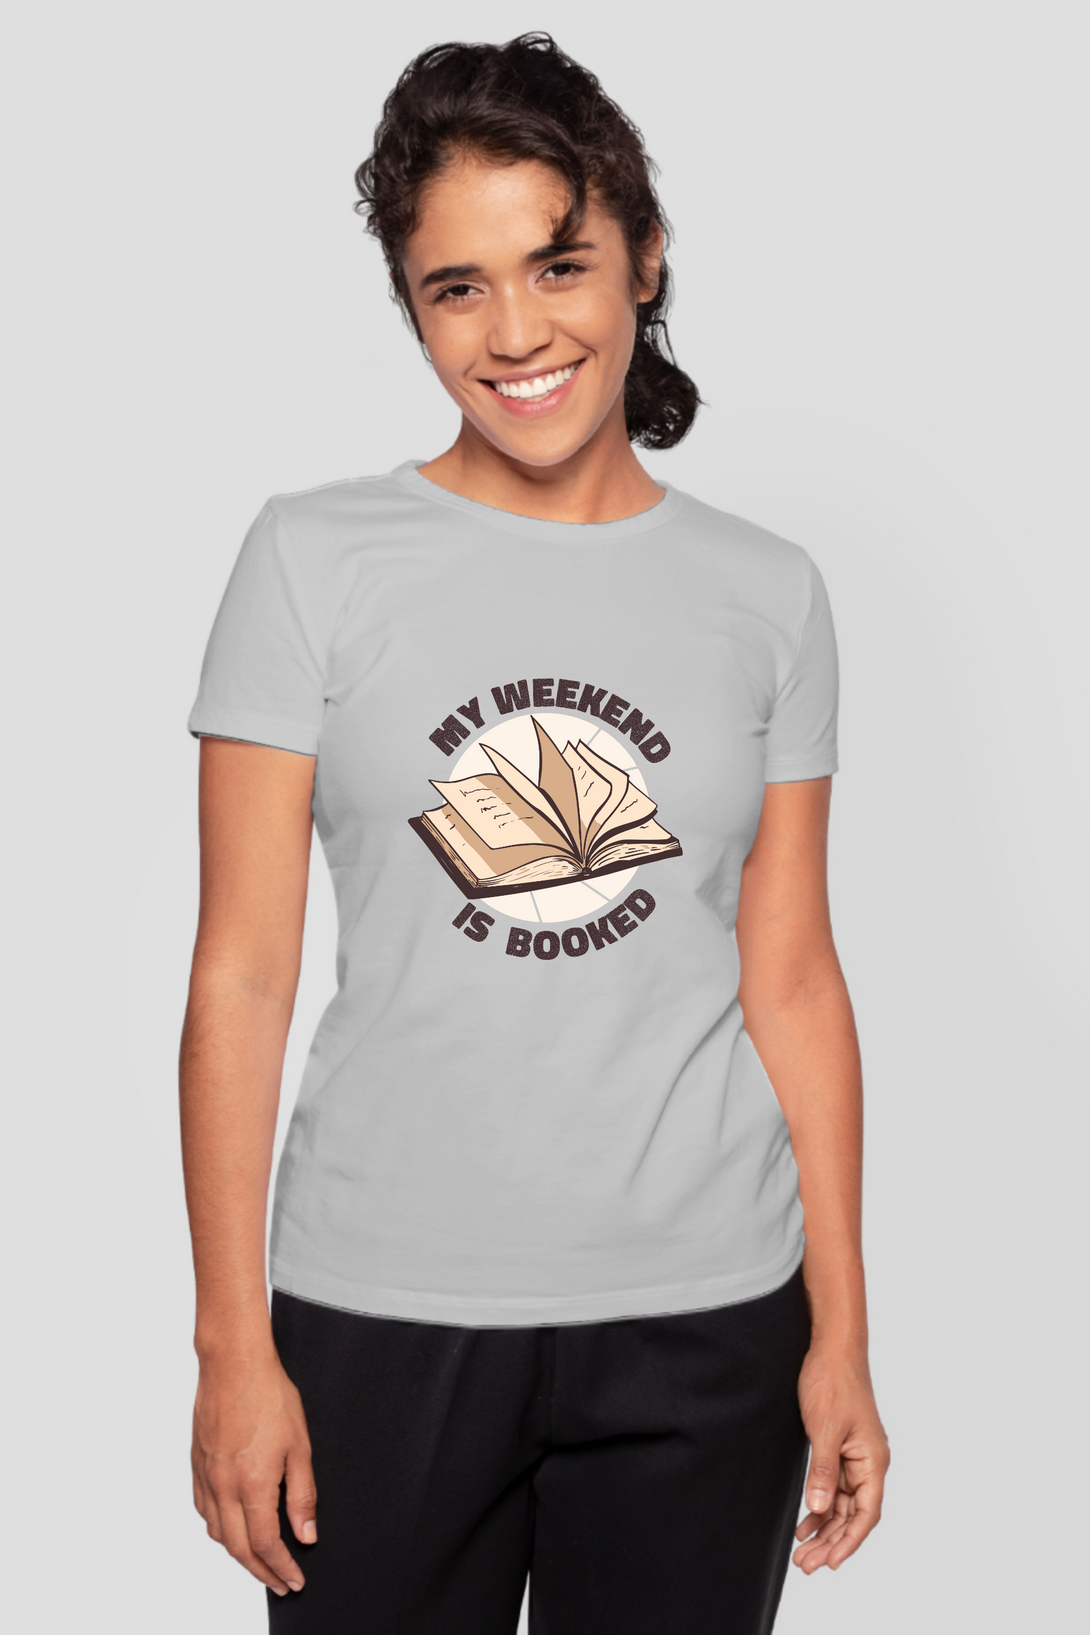 My Weekend Is Booked Printed T-Shirt For Women - WowWaves - 11